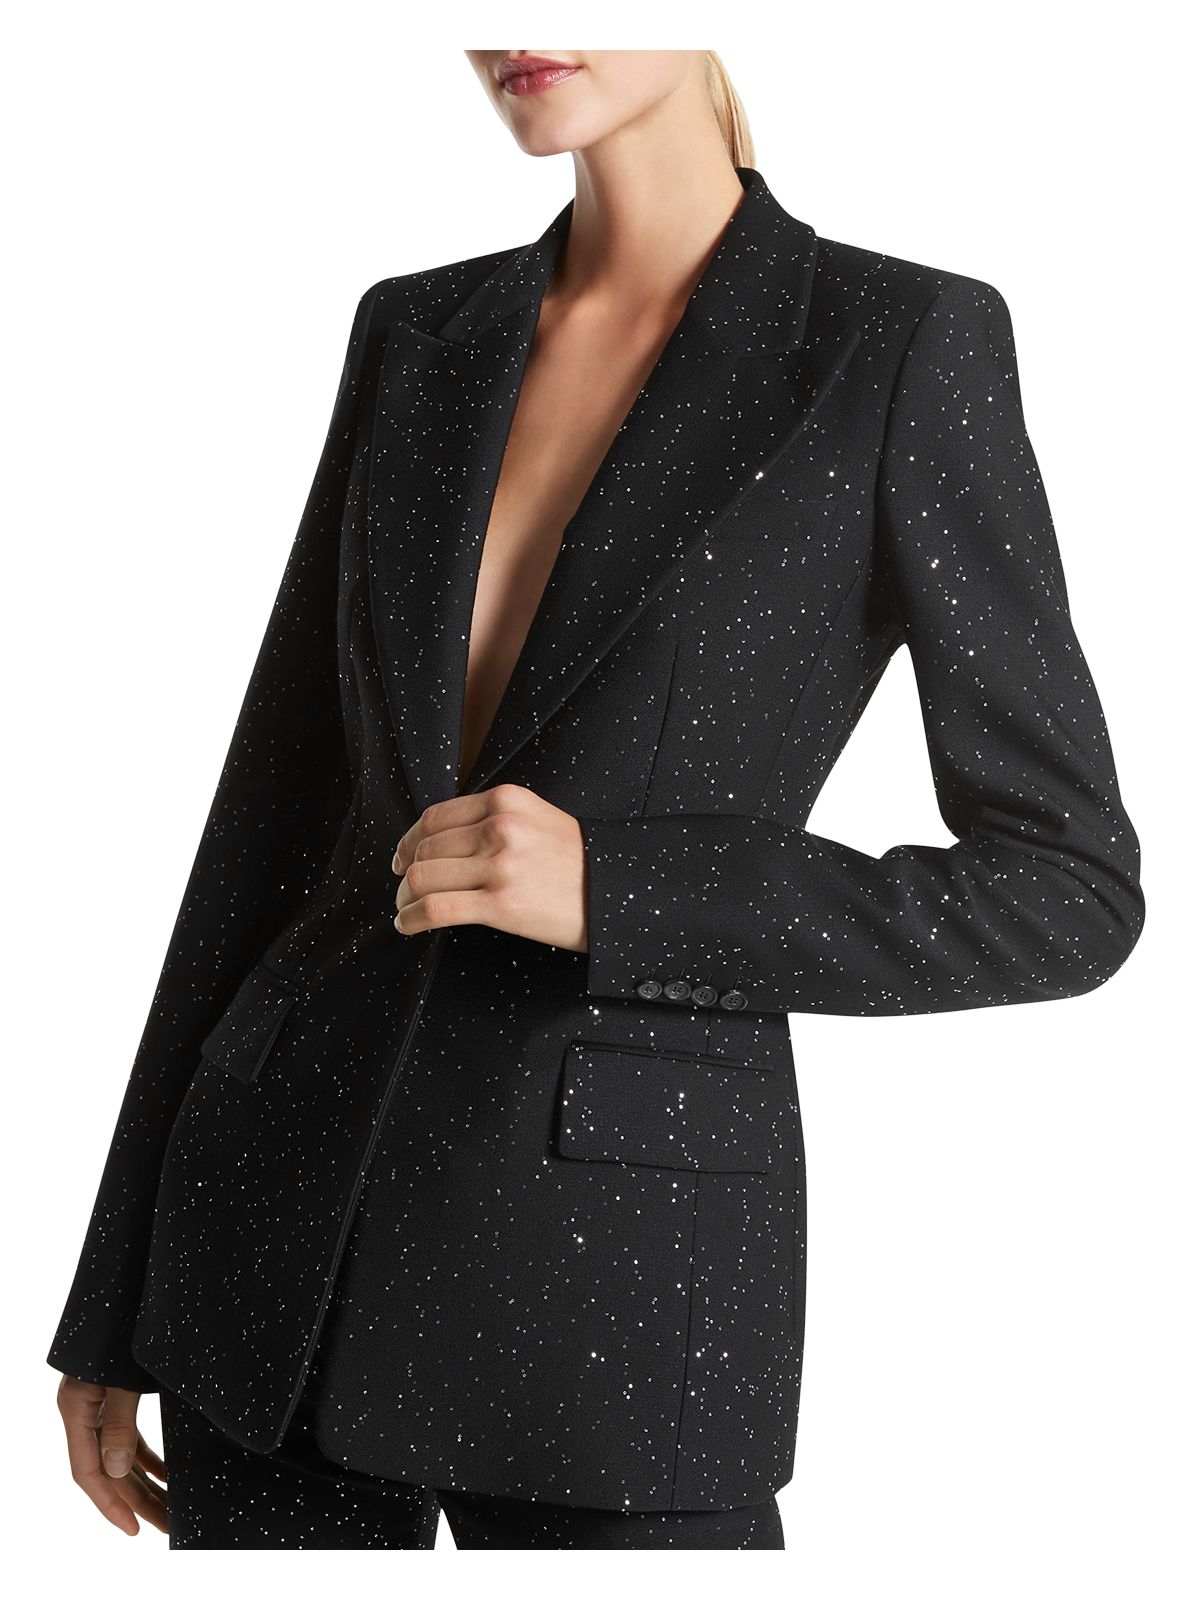 MICHAEL KORS COLLECTION Womens Black Sequined Pocketed Single Breasted Lined Wear To Work Blazer Jacket 14